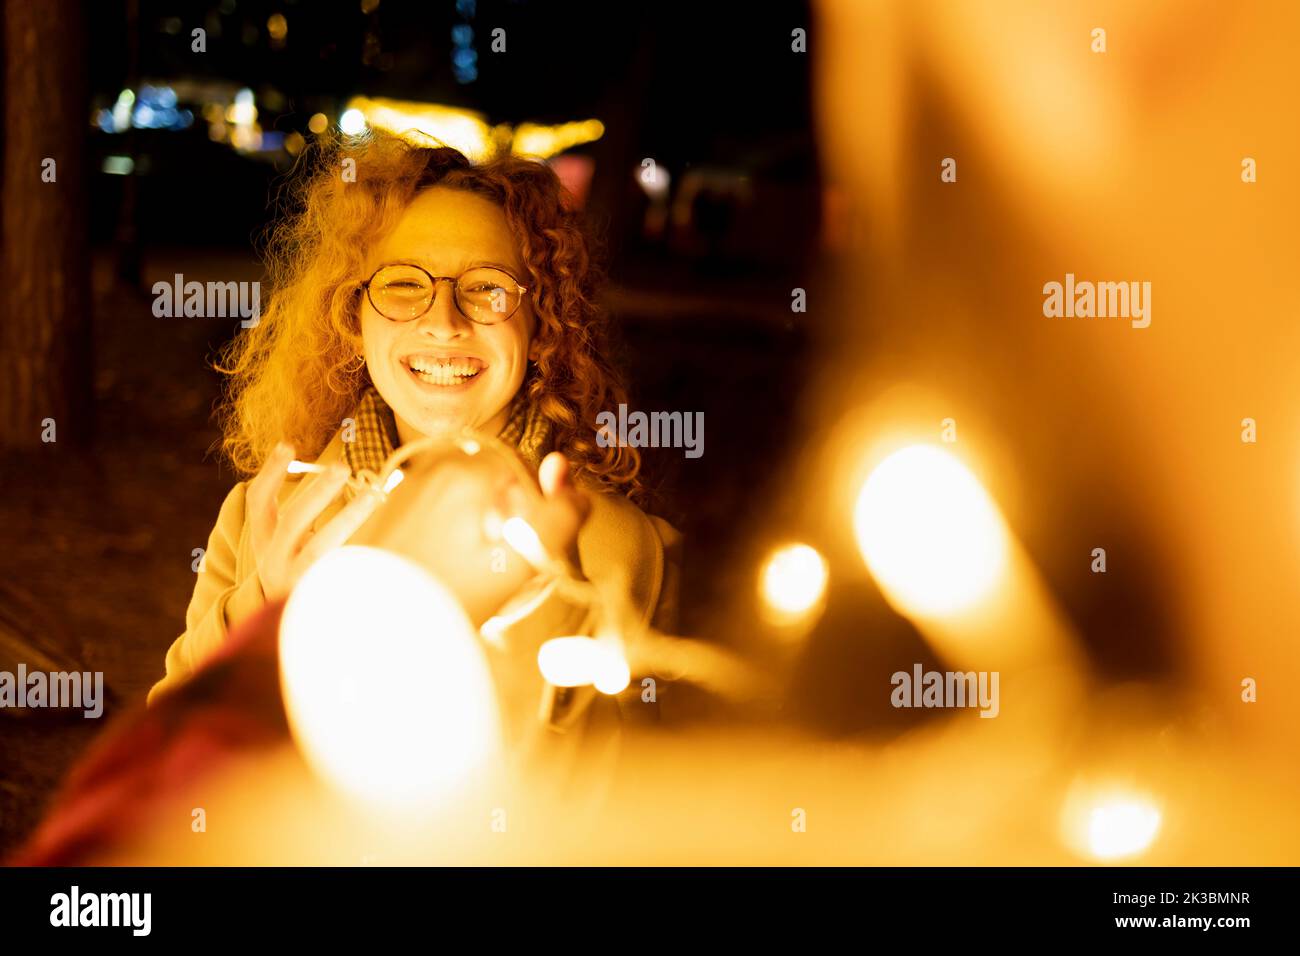 Young Caucasian woman under night lights Stock Photo